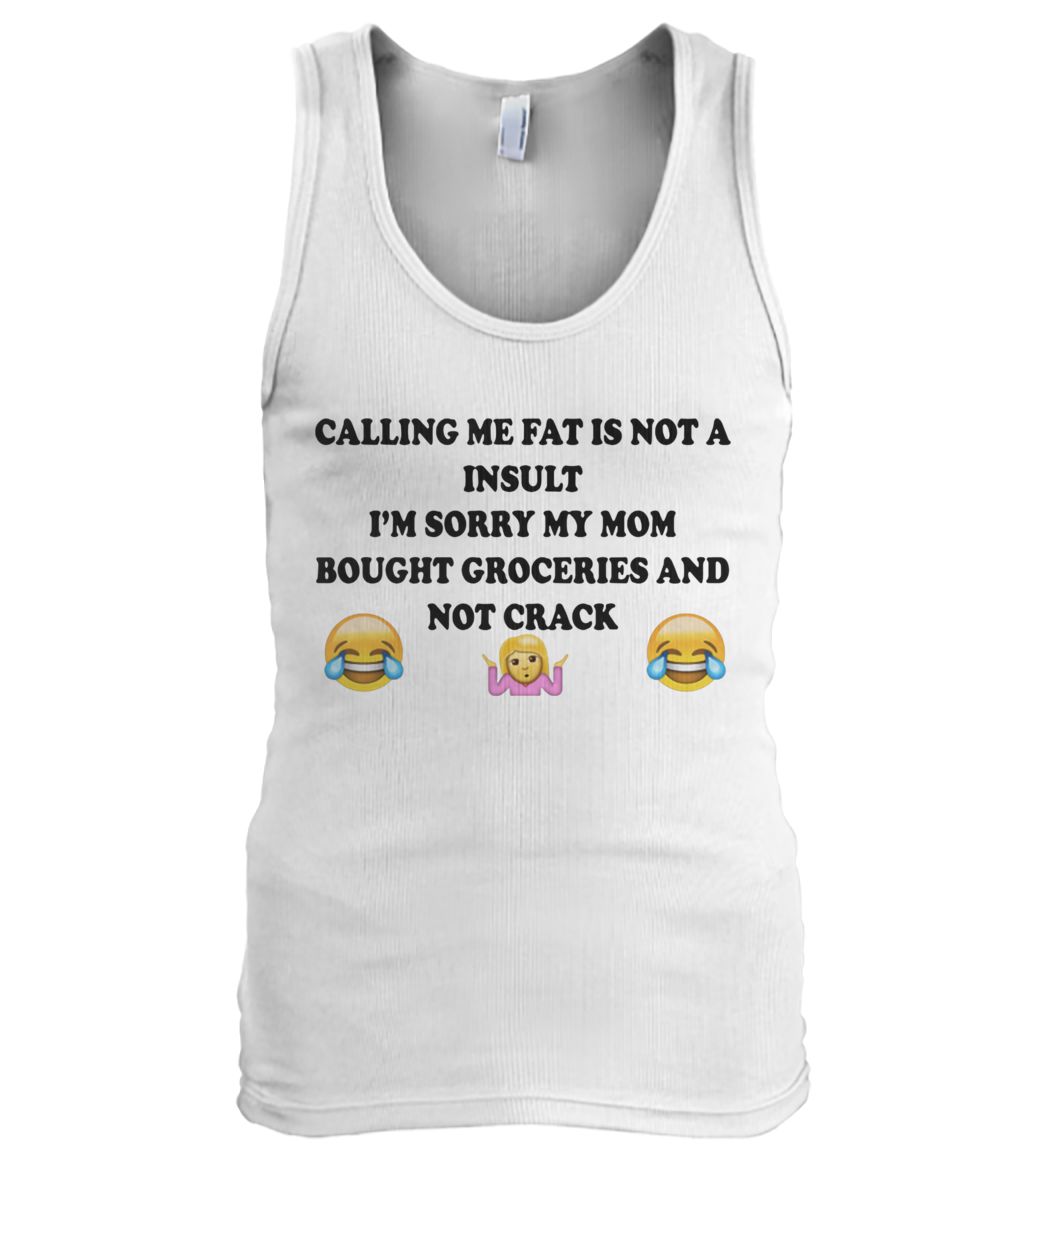 Calling me fat is not a insult I’m sorry my mom bought groceries and not crack men's tank top